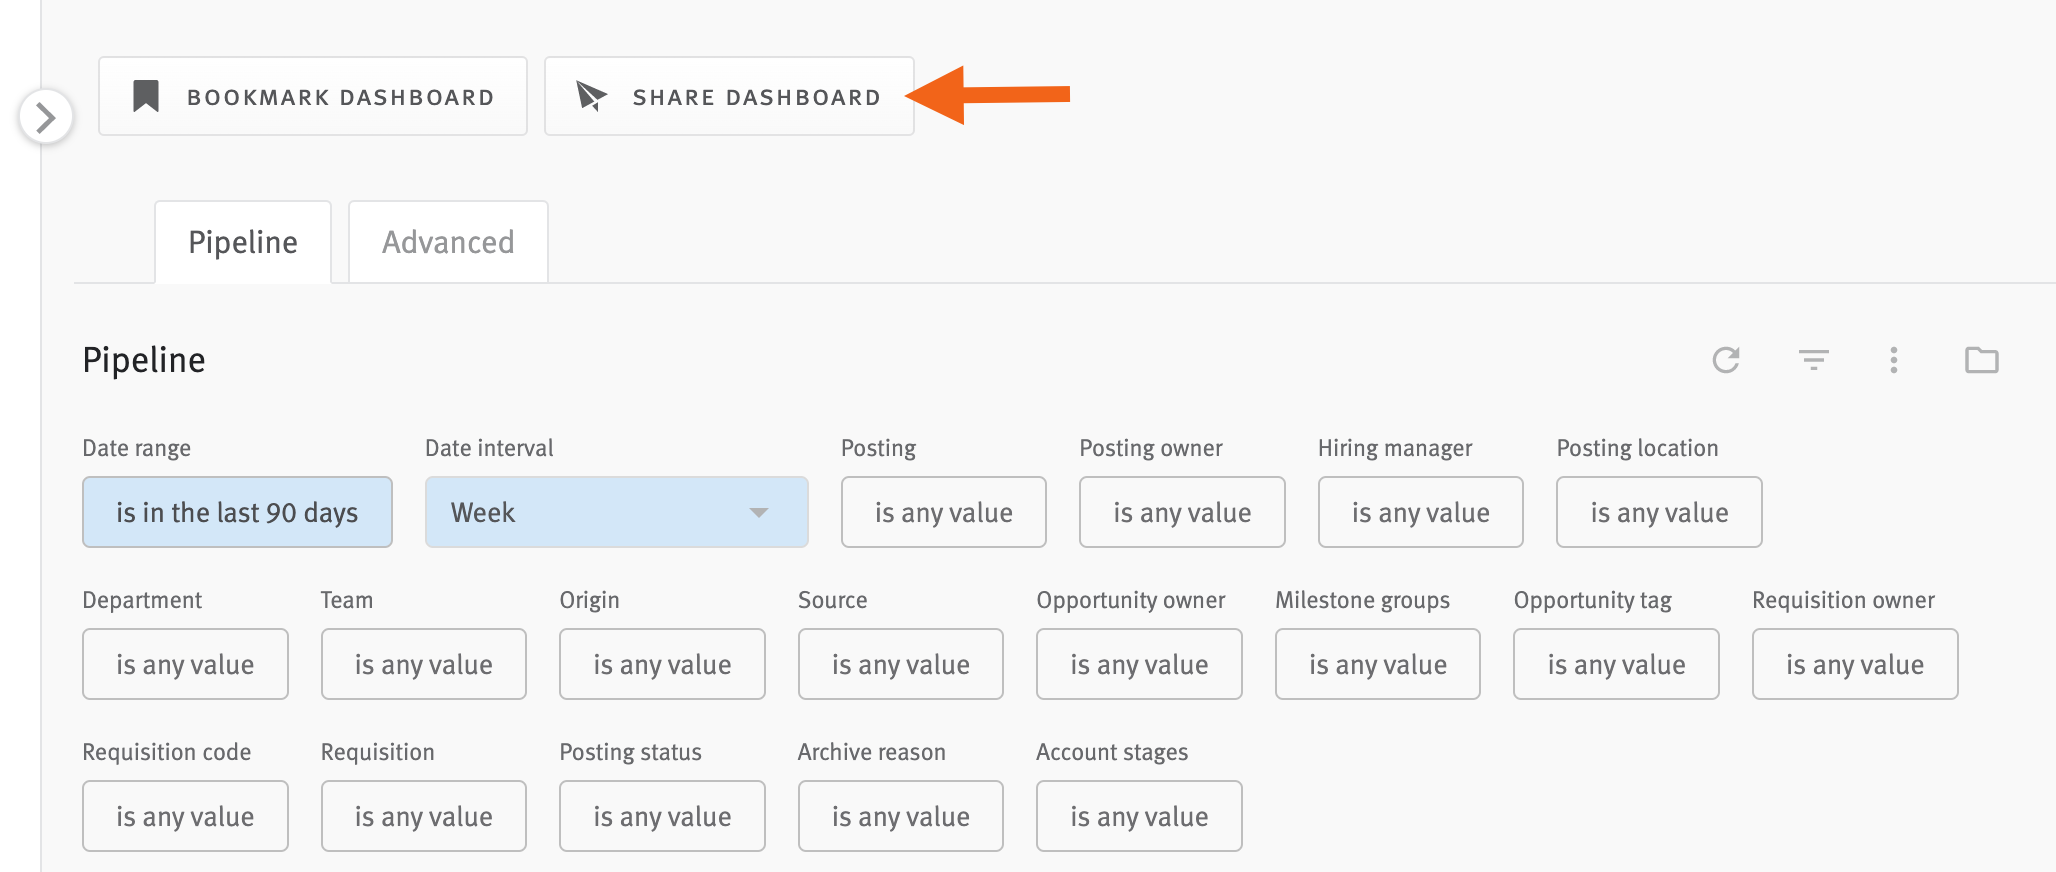 Arrow pointing to Share Dashboard button above Pipeline dashboard.